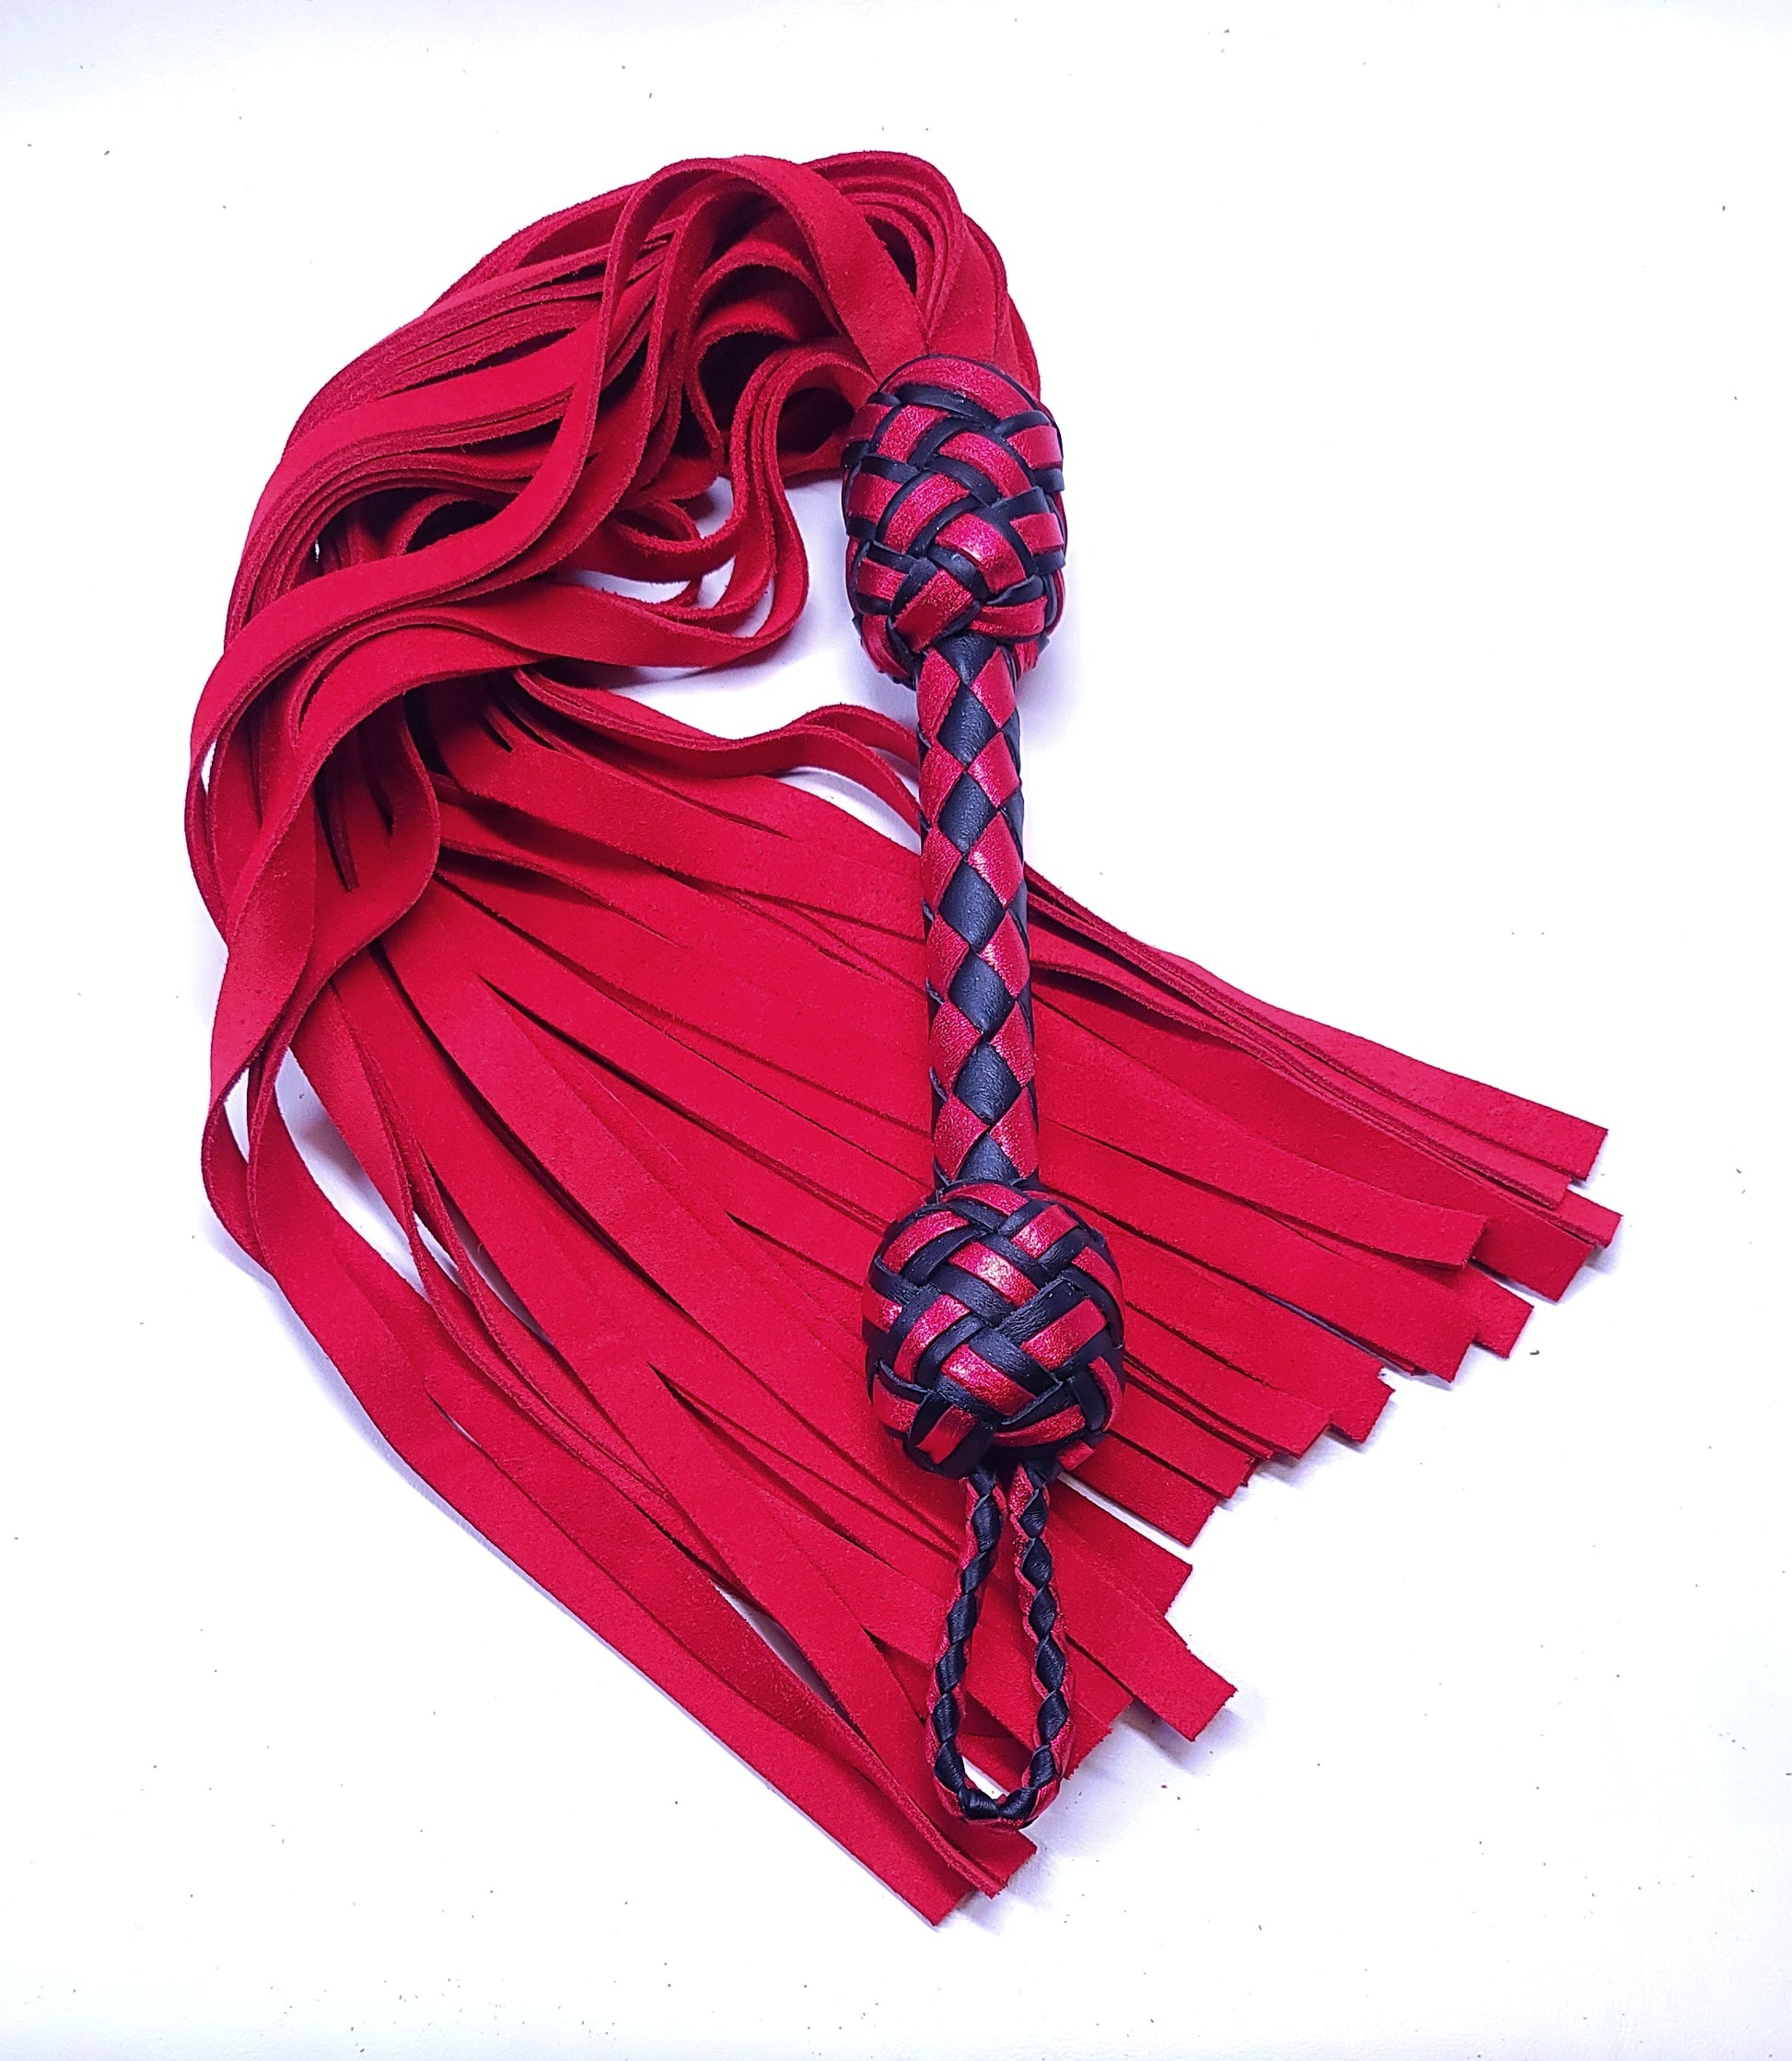 Rouge Short Suede Flogger Leather Handle